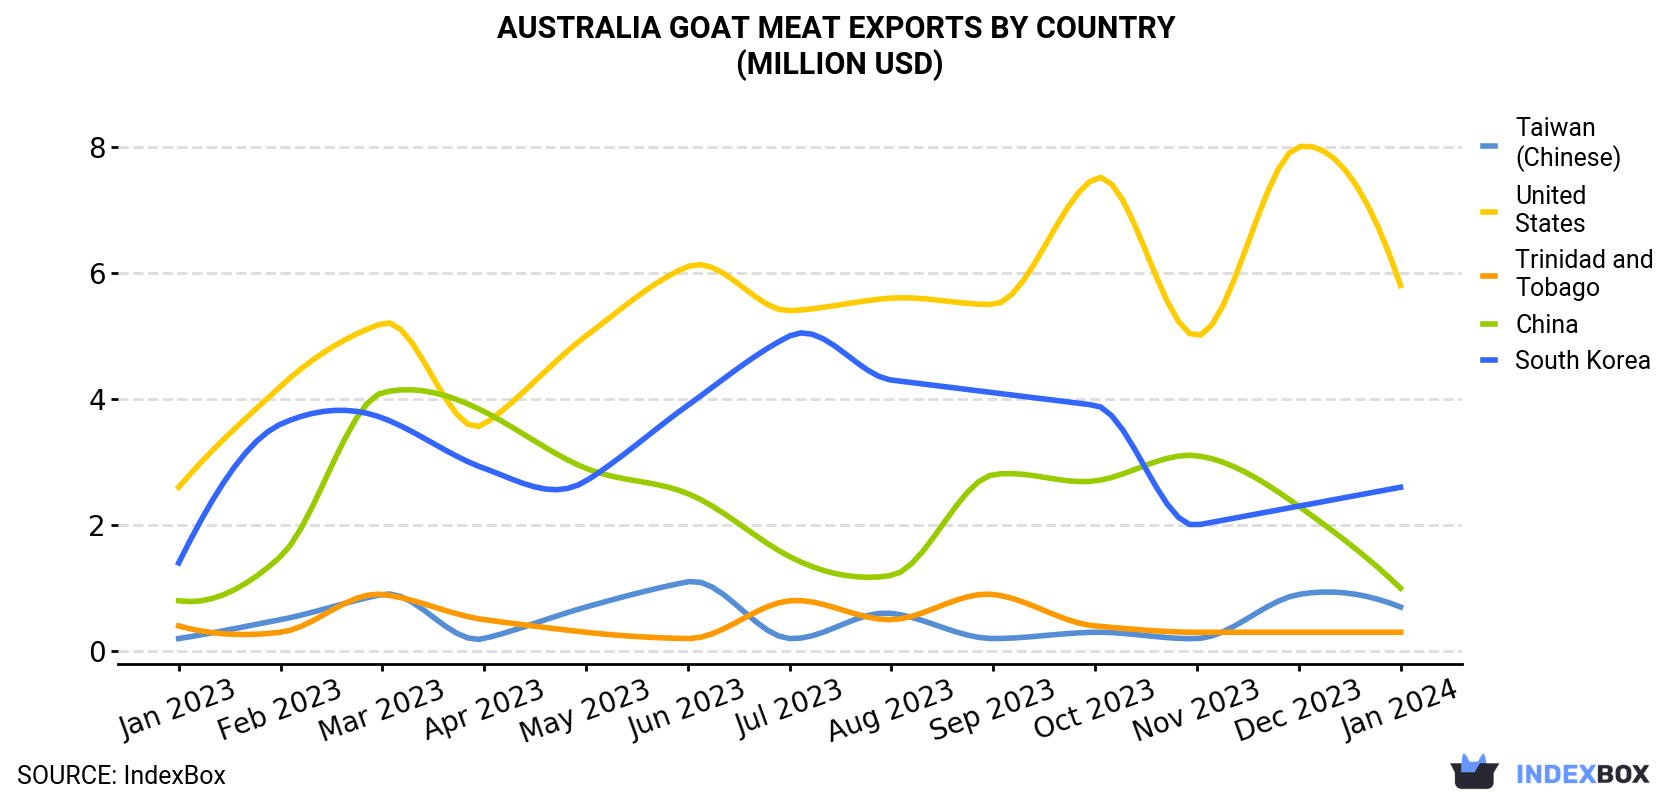 Australia Goat Meat Exports By Country (Million USD)